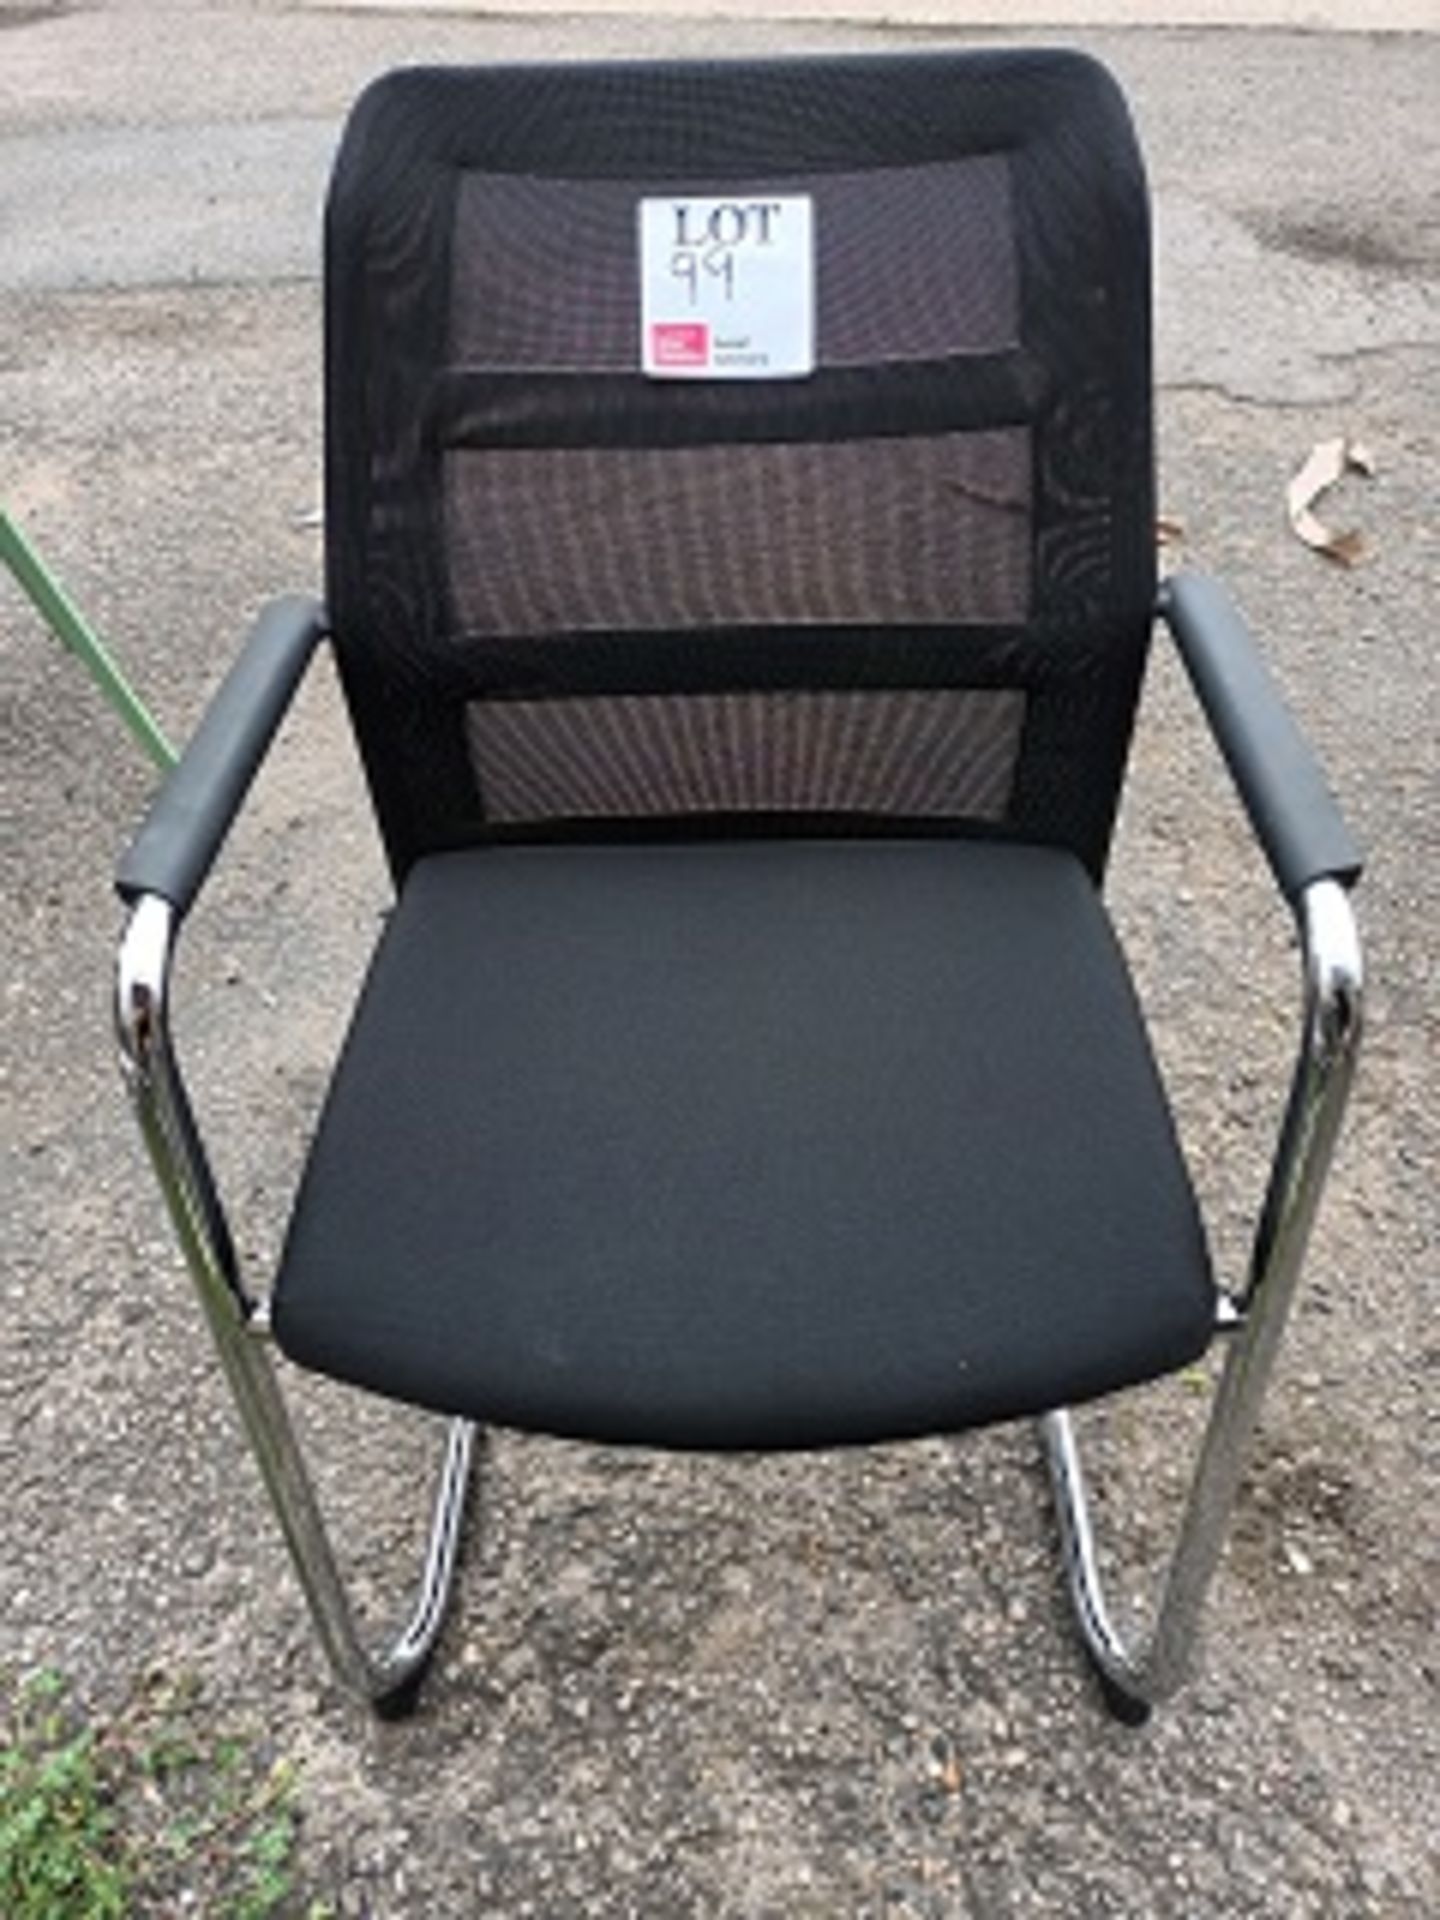 Unbranded black upholstered chrome frame meeting chair (Located: Billericay)